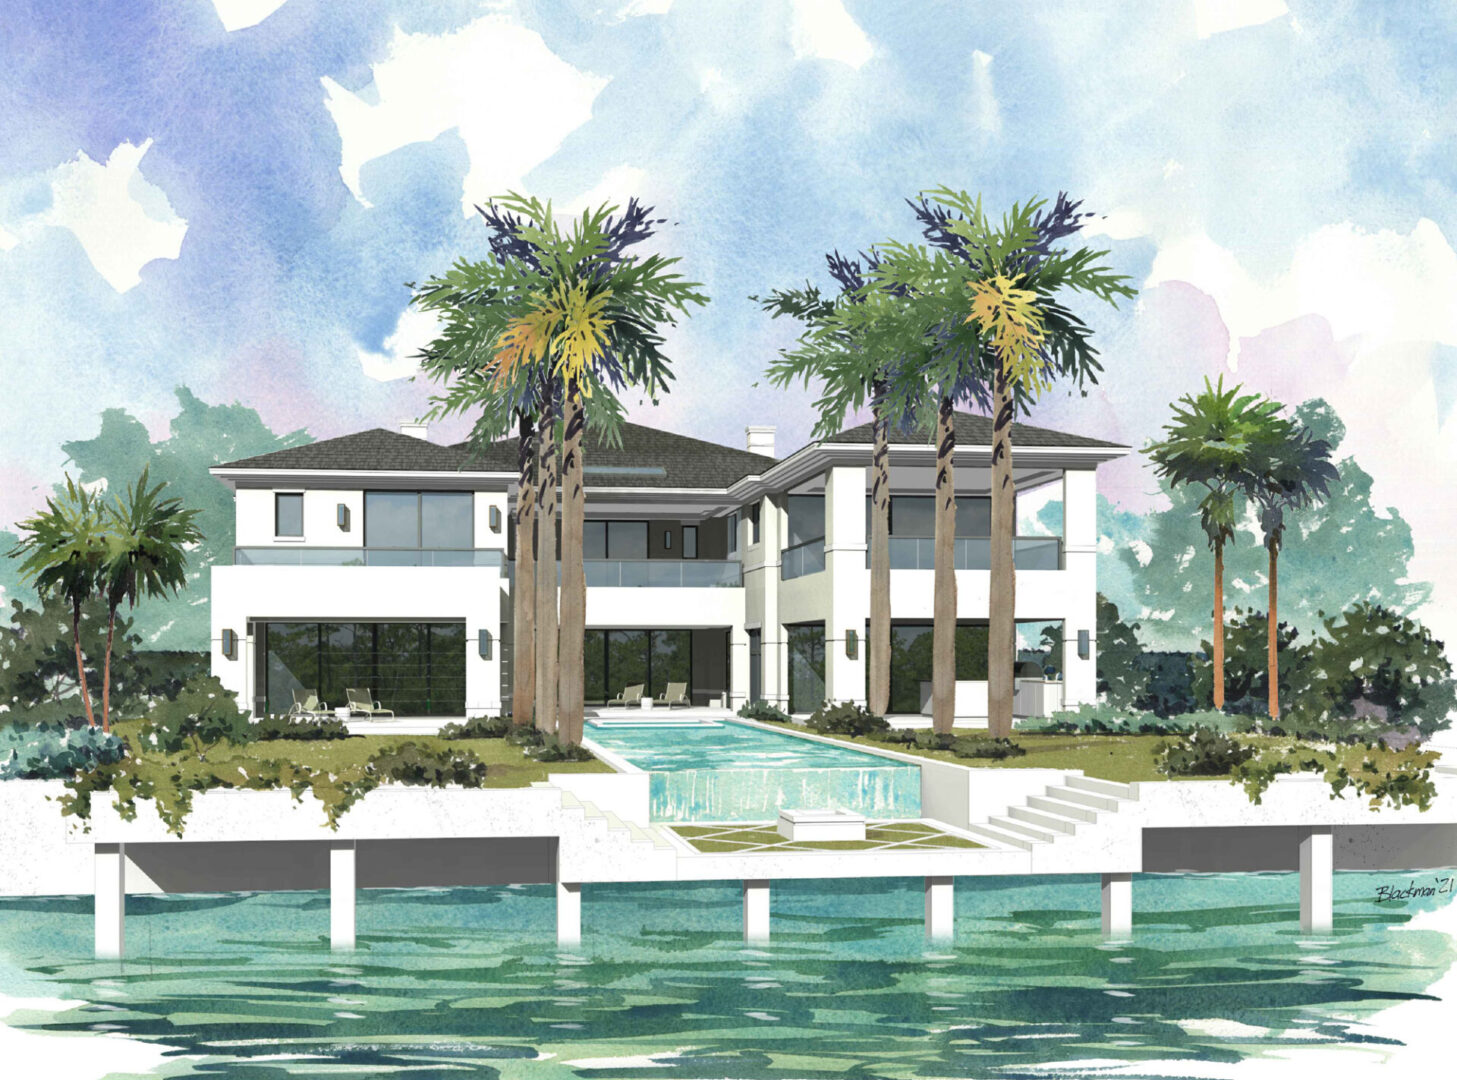 A rendering of the front of a house with palm trees.